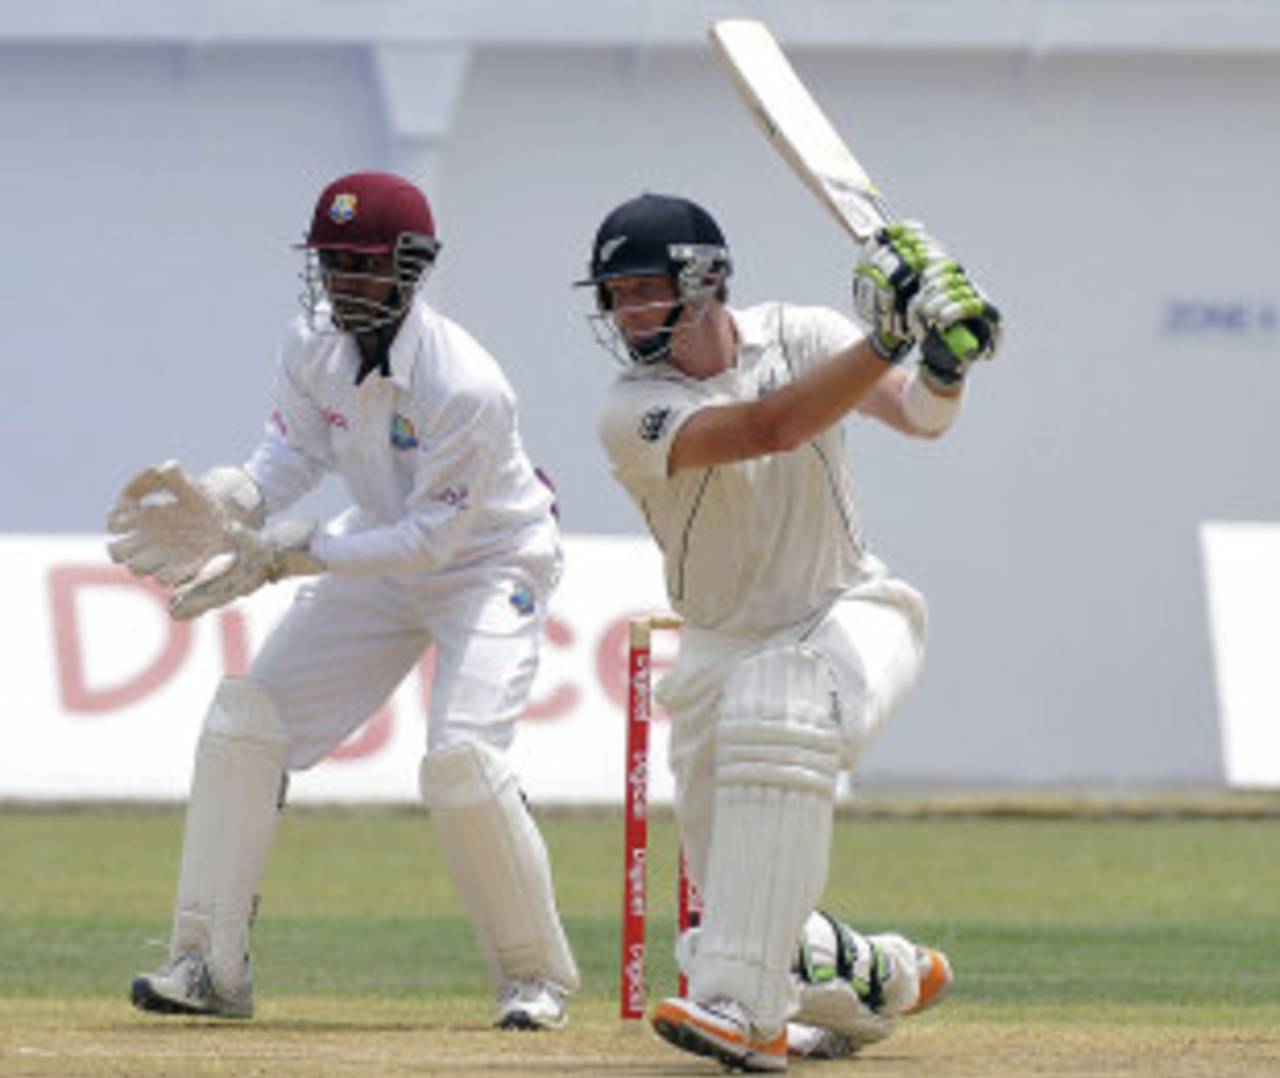 Martin Guptill drives through the covers, West Indies v New Zealand, 2nd Test, Jamaica, 1st day, August 2, 2012